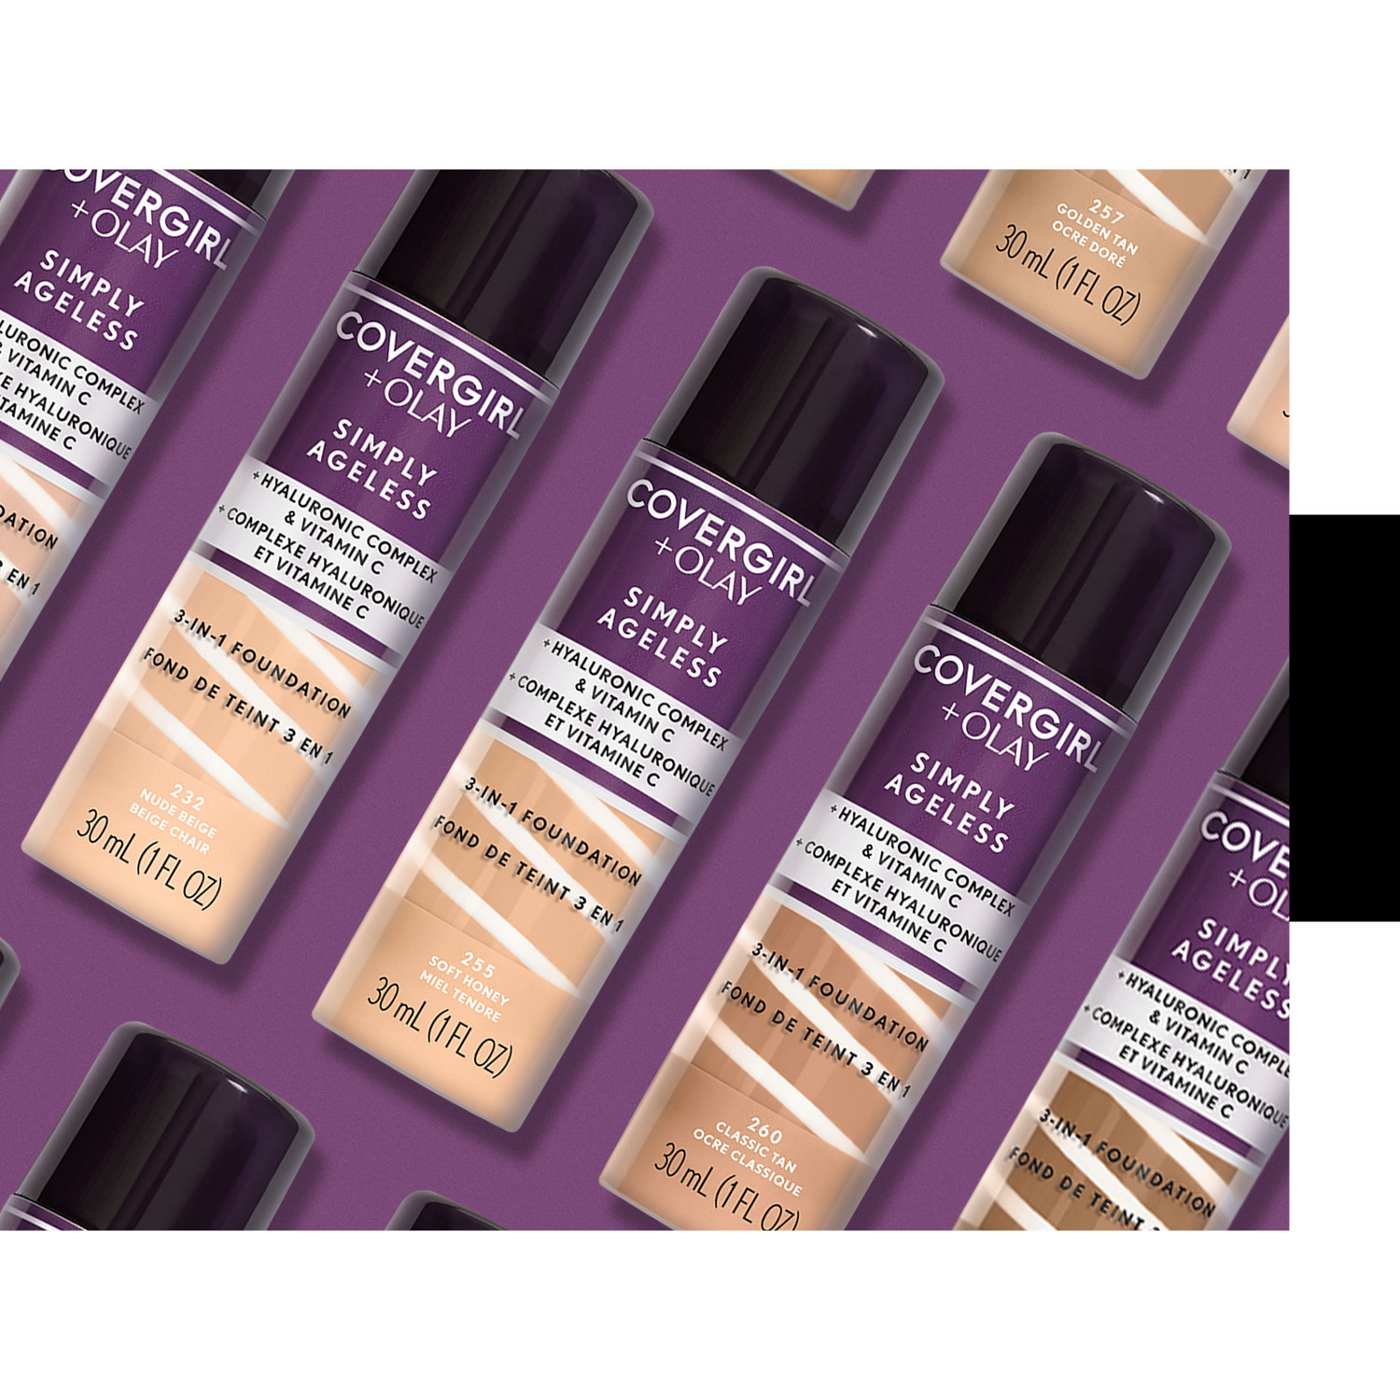 Covergirl Simply Ageless 3-in-1 Liquid Foundation 210 Classic Ivory; image 3 of 6